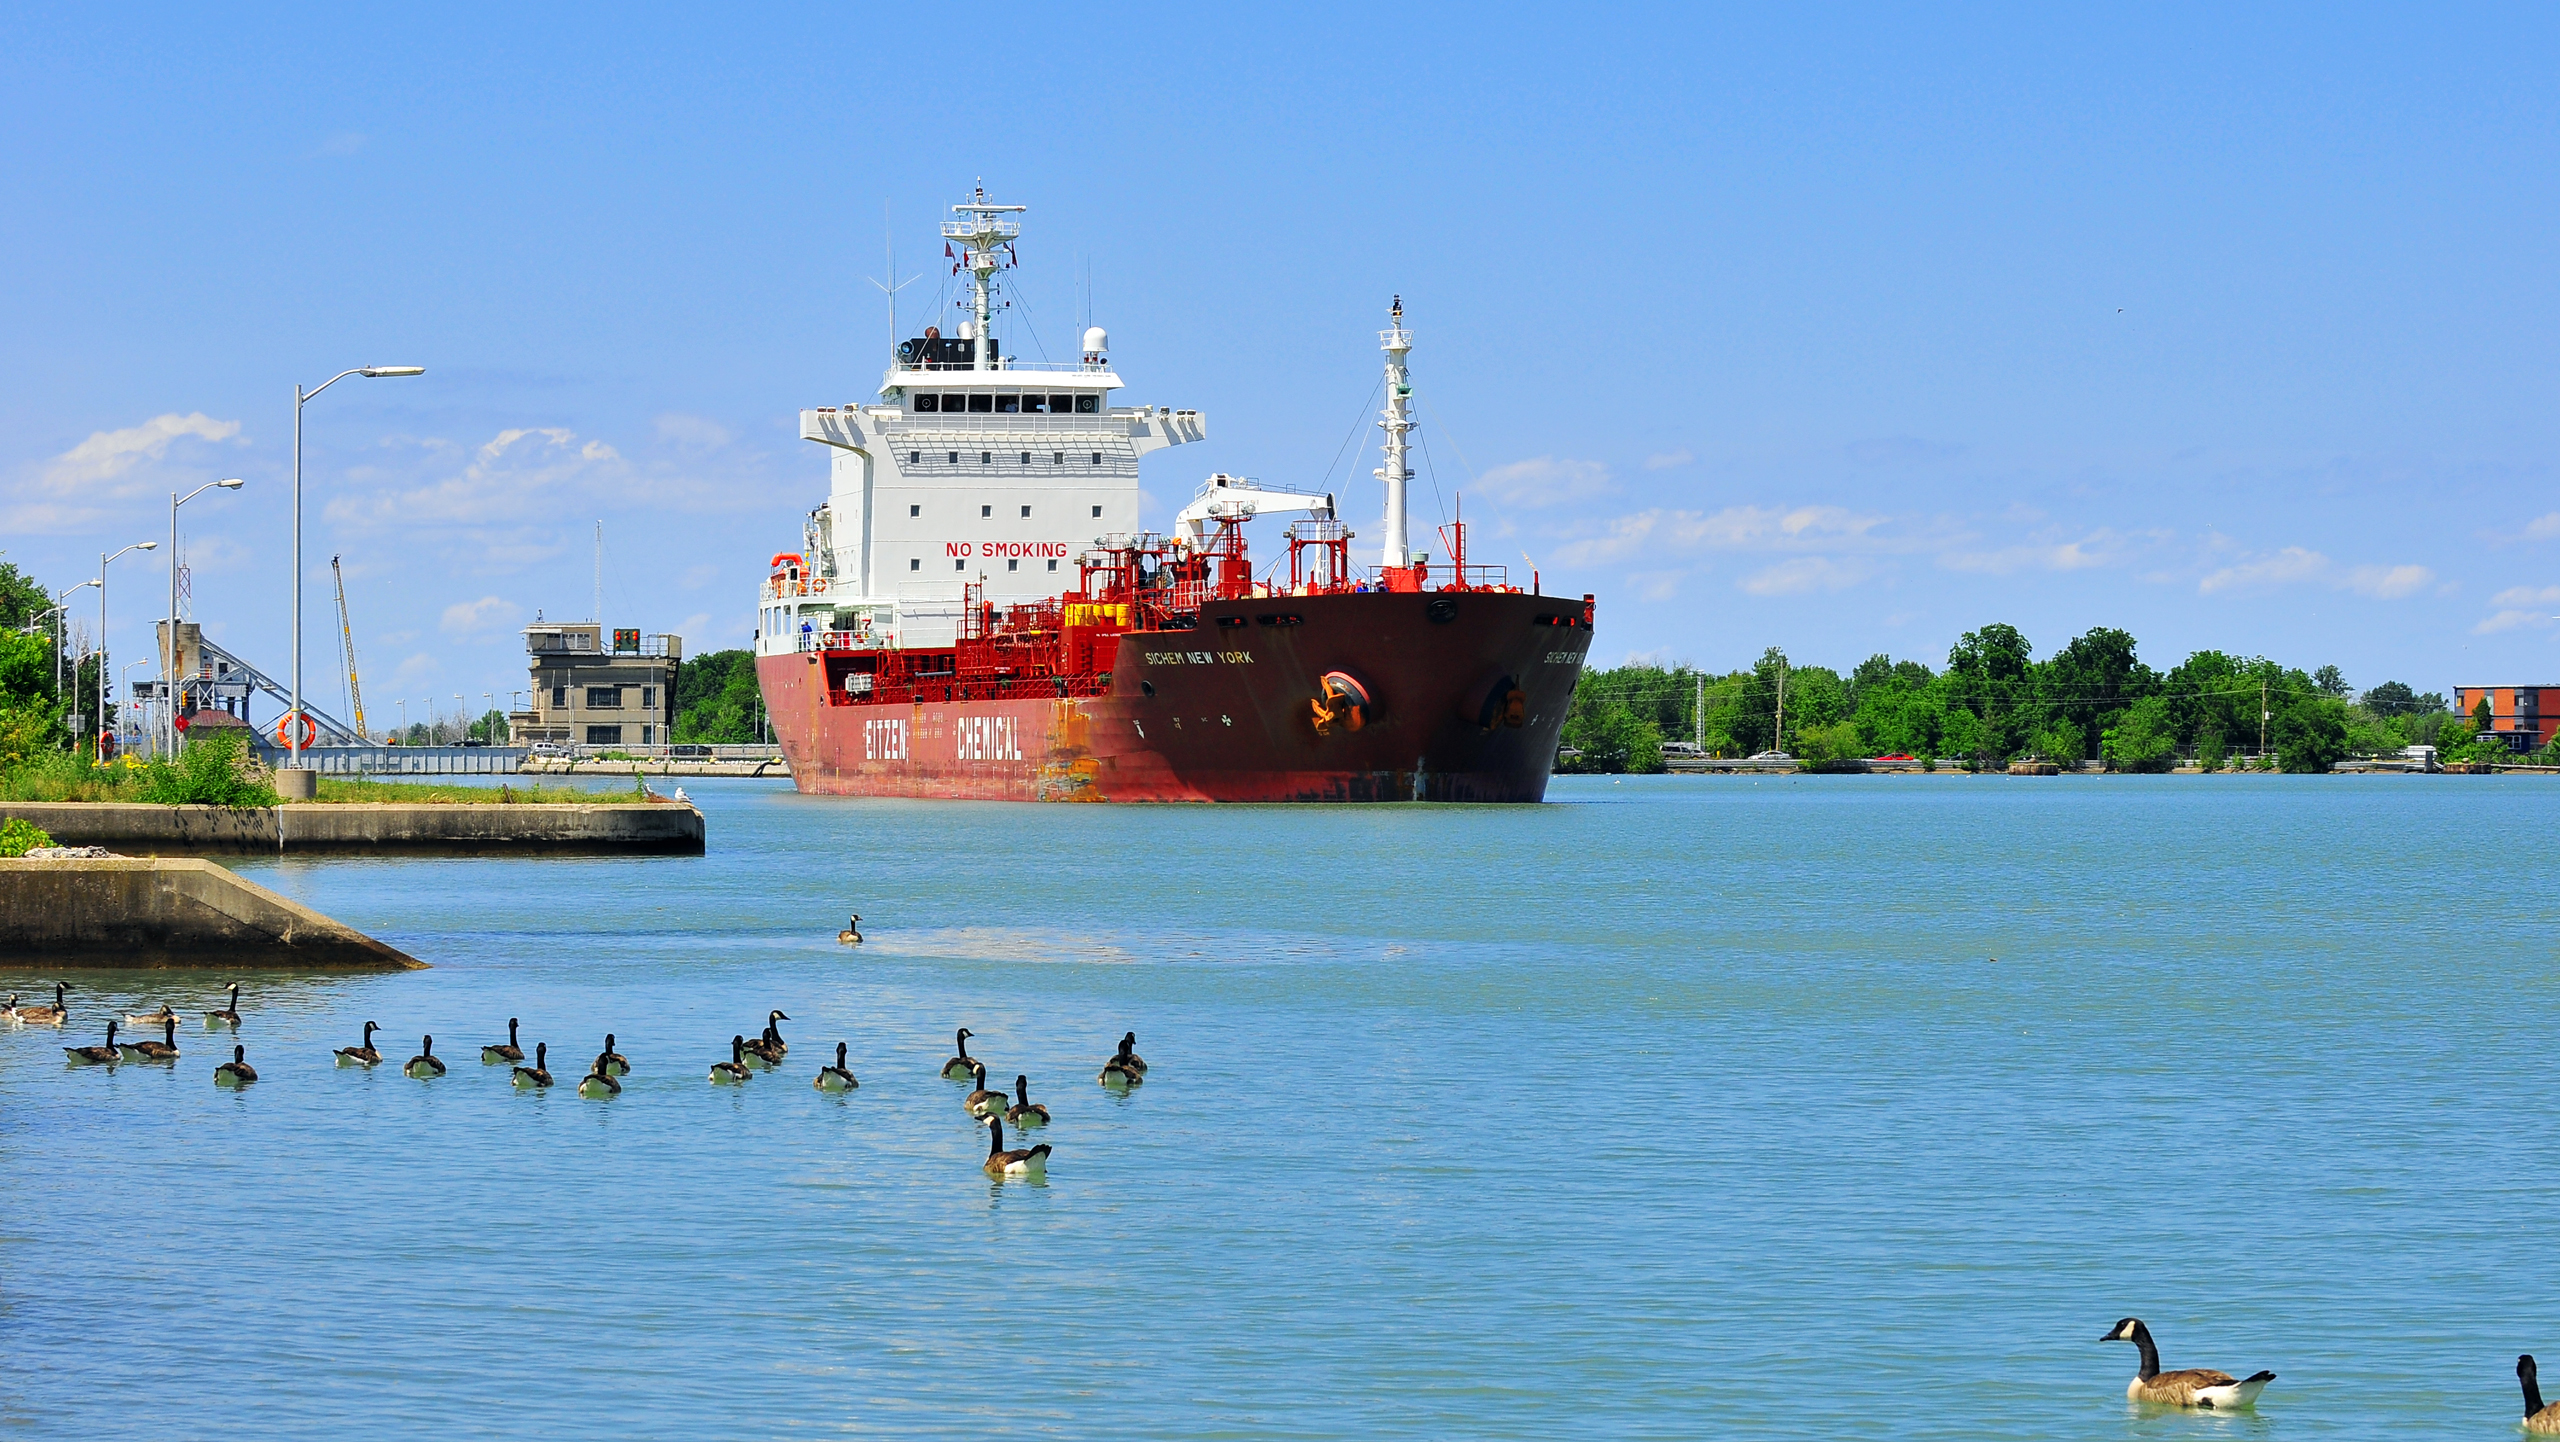 A ship on the Welland Canal